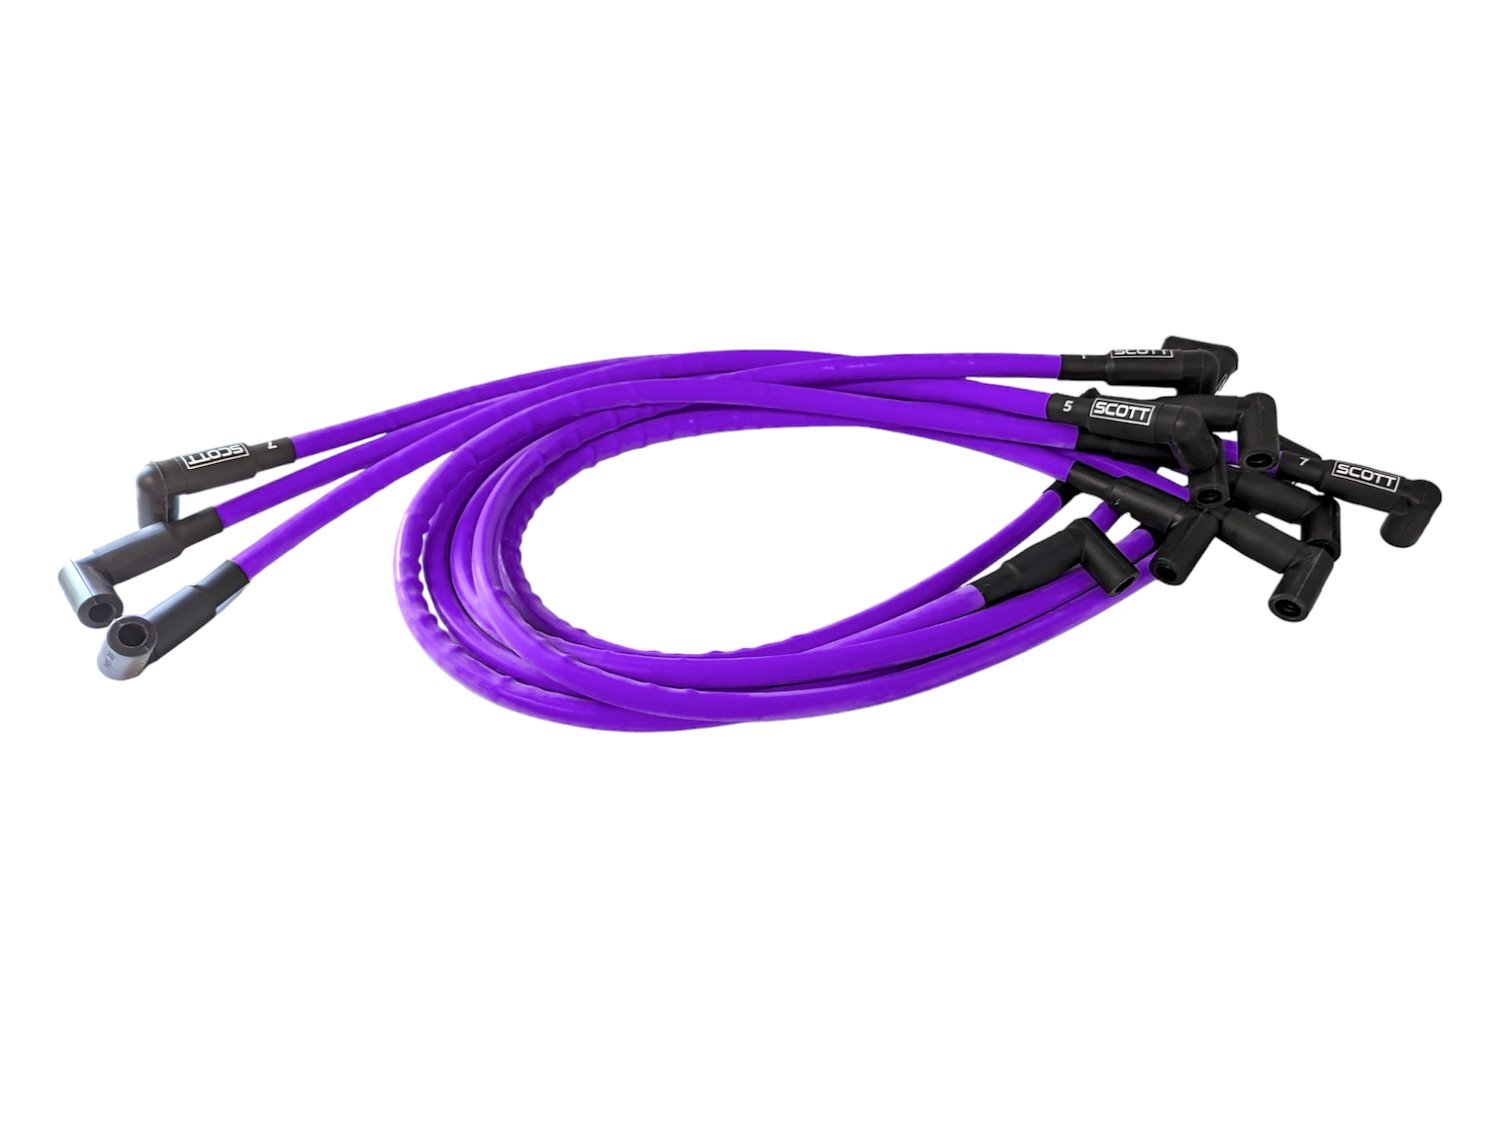 SPW-CH-416-6 High-Performance Silicone-Sleeved Spark Plug Wire Set for Big Block Chevy, Under Header [Purple]